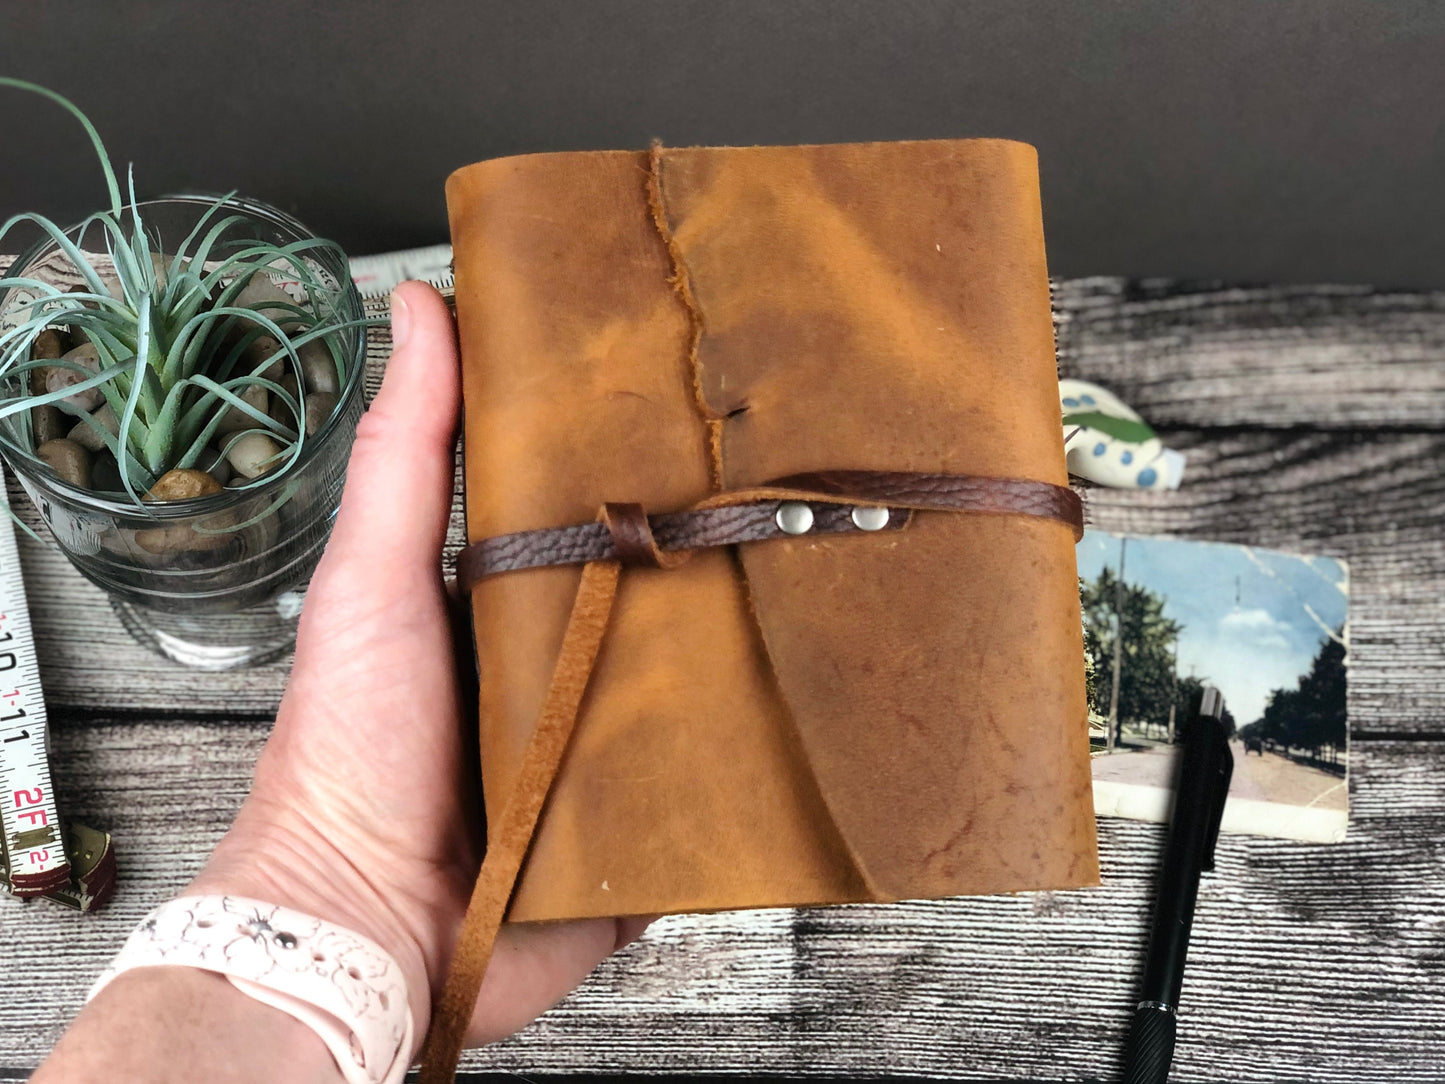 Wednesday, 7/31 - Make Your Own Leather Journal $65+ with materials